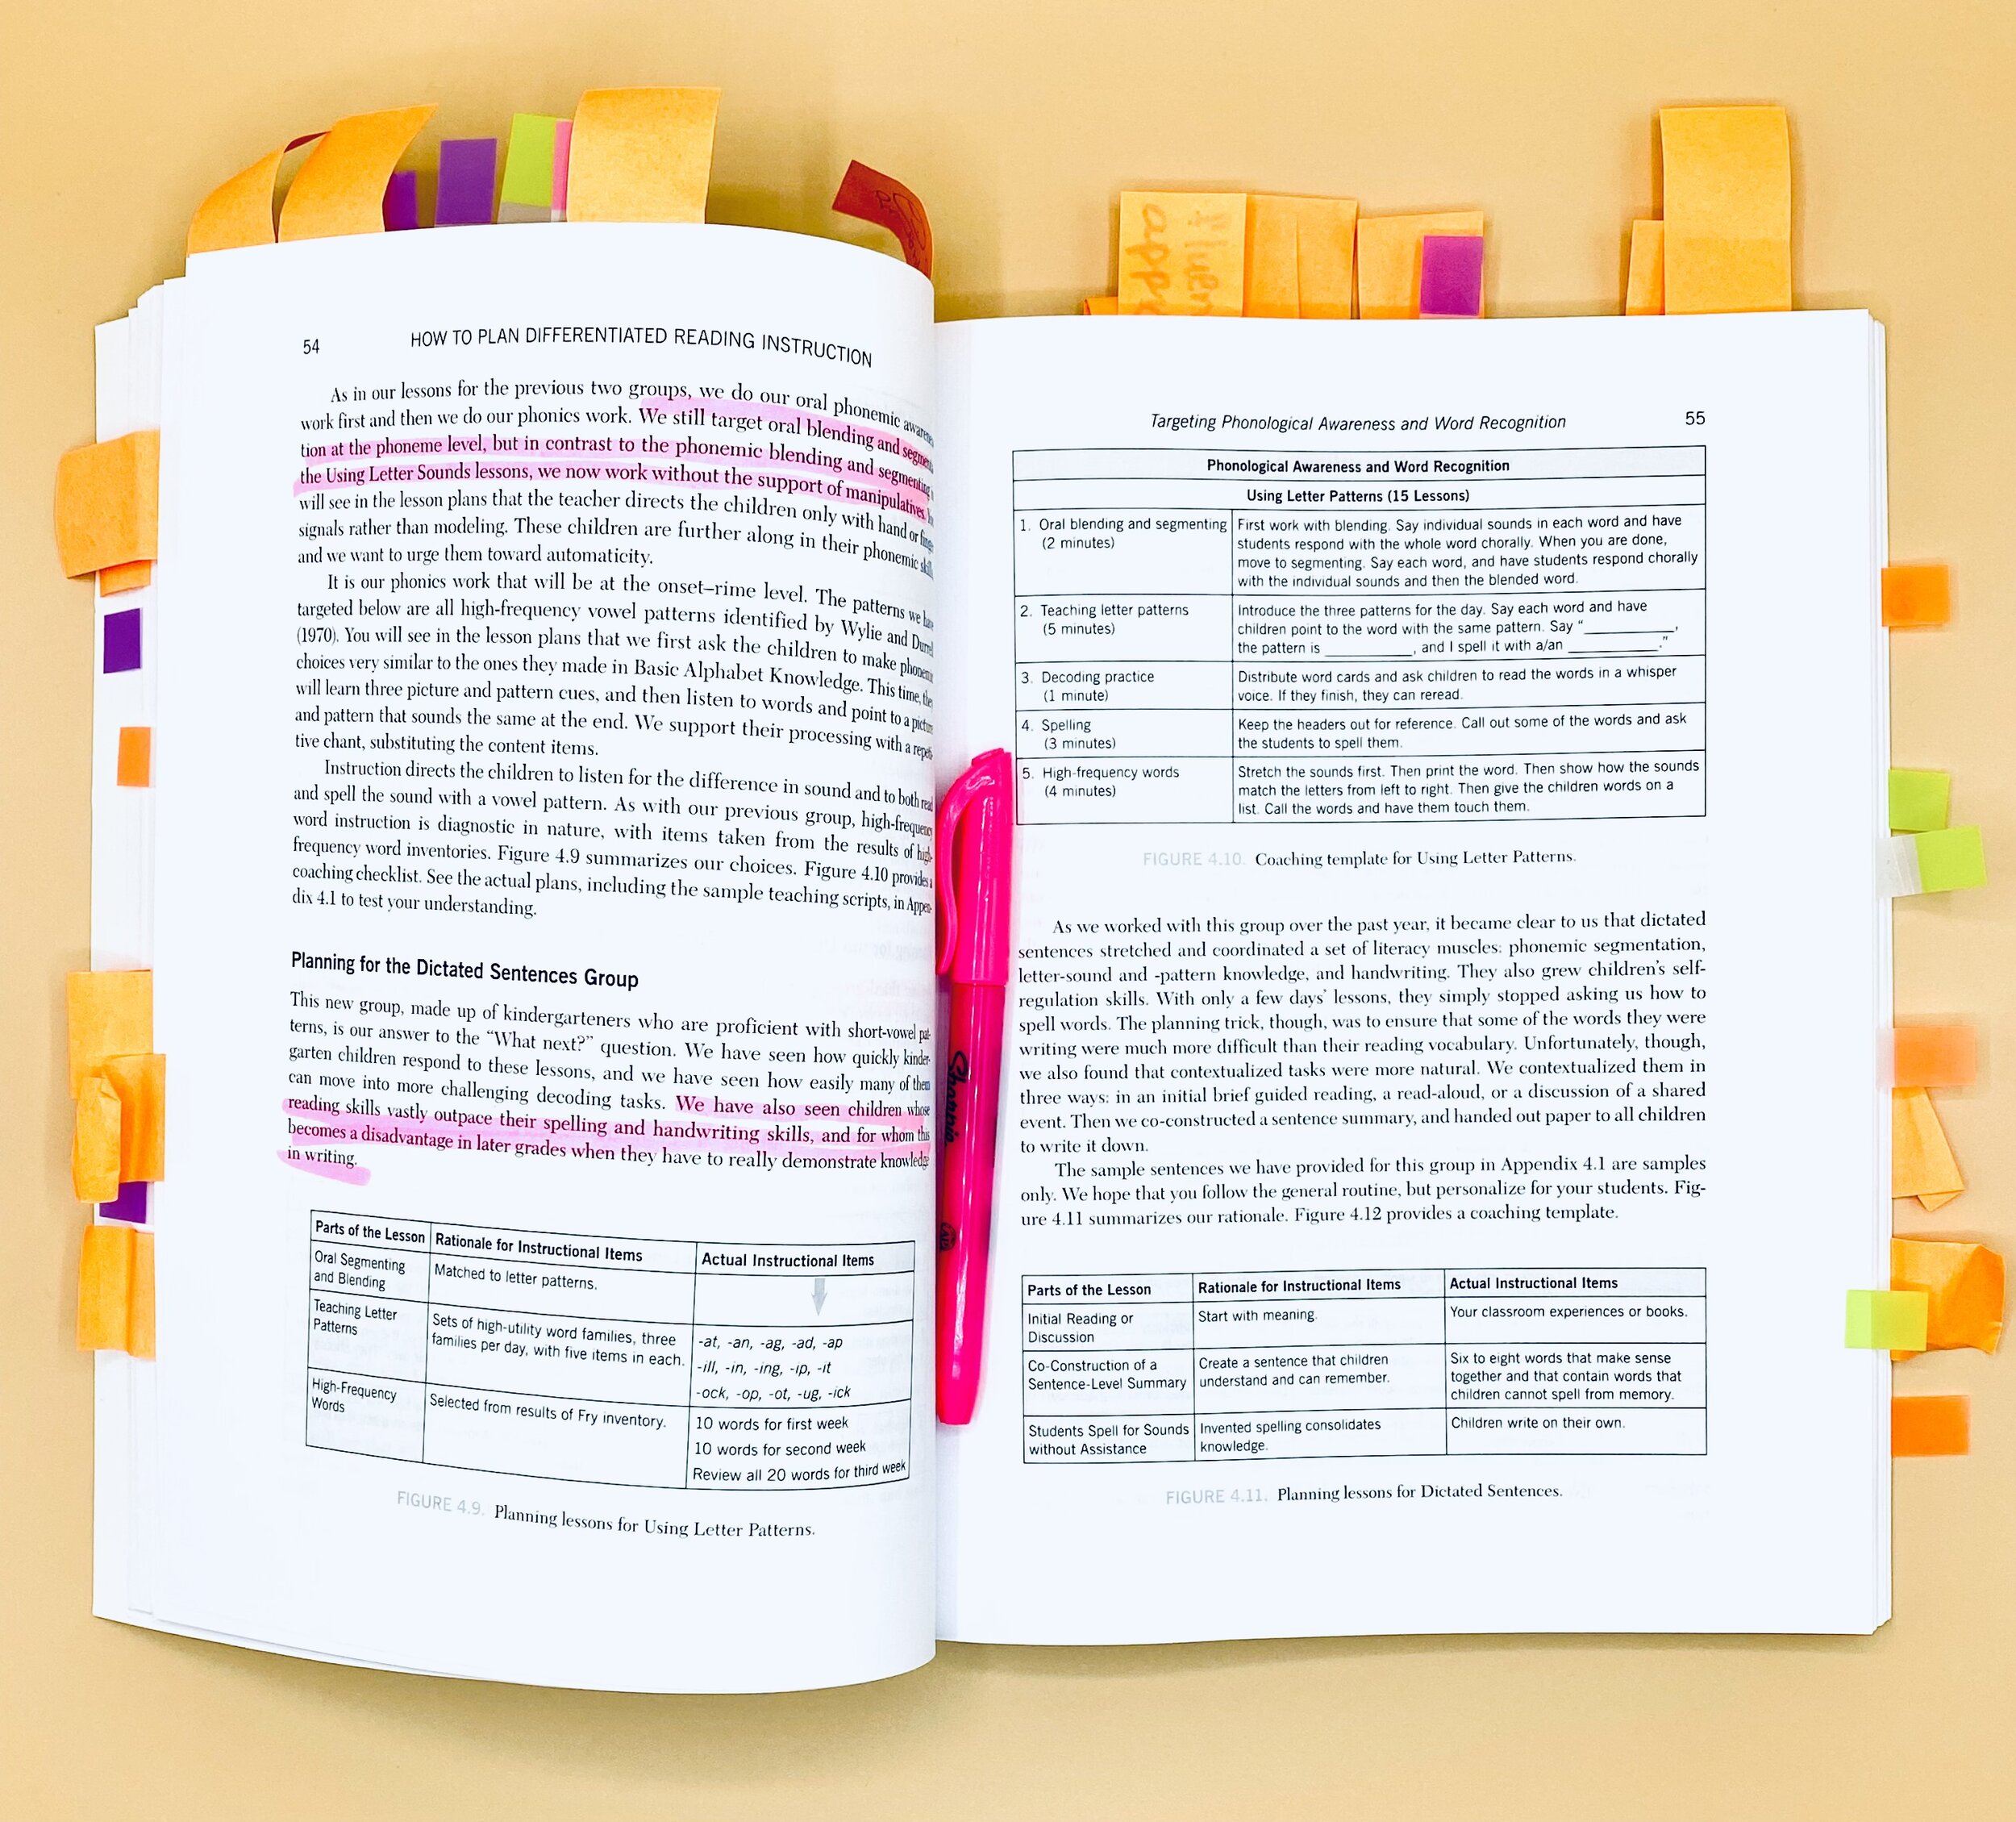 How do you know it’s a good text?  Look at all these sticky notes and highlights!